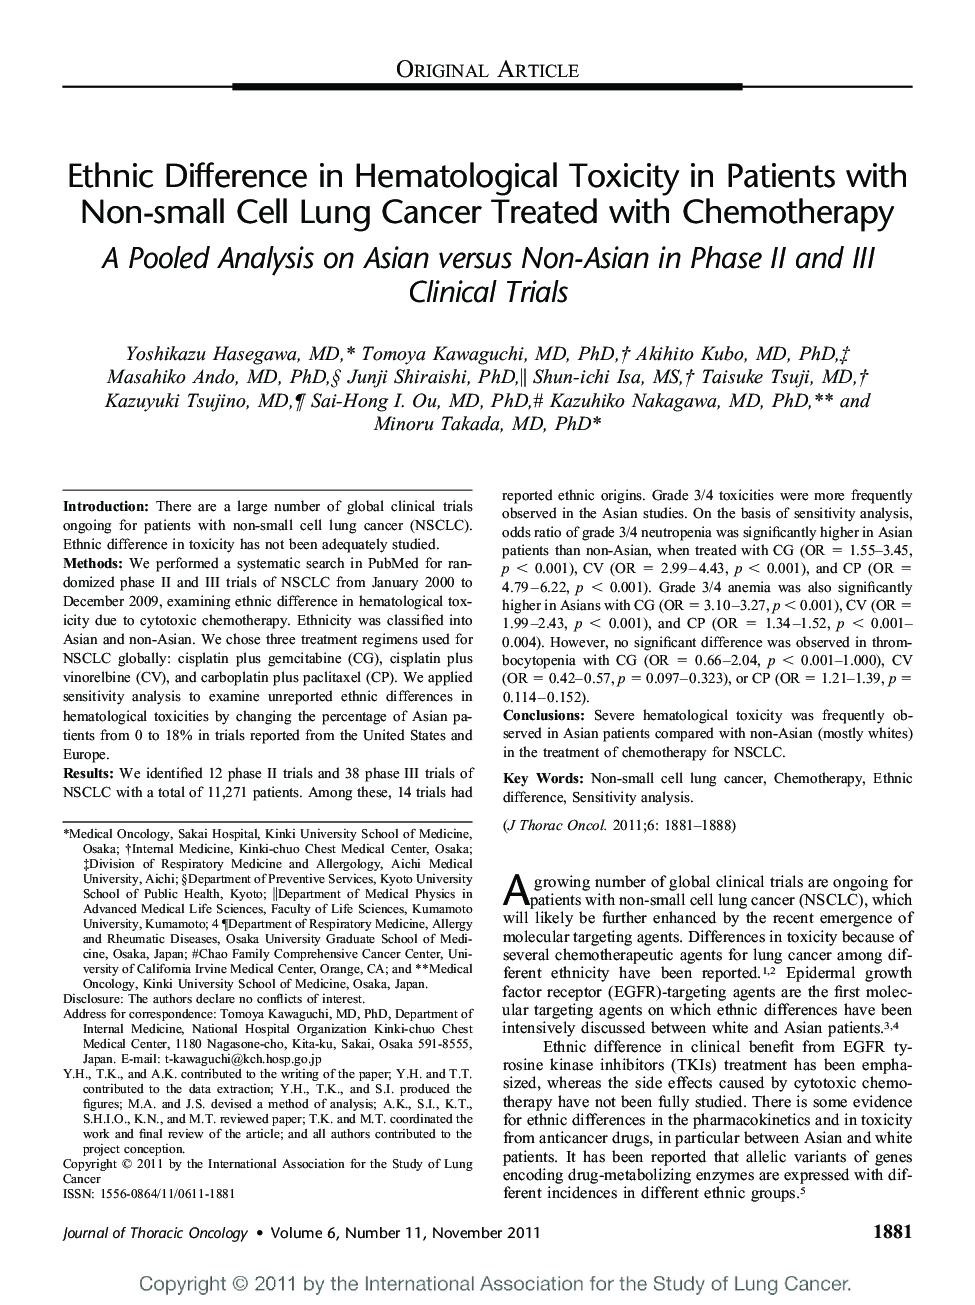 Ethnic Difference in Hematological Toxicity in Patients with Non-small Cell Lung Cancer Treated with Chemotherapy: A Pooled Analysis on Asian versus Non-Asian in Phase II and III Clinical Trials 